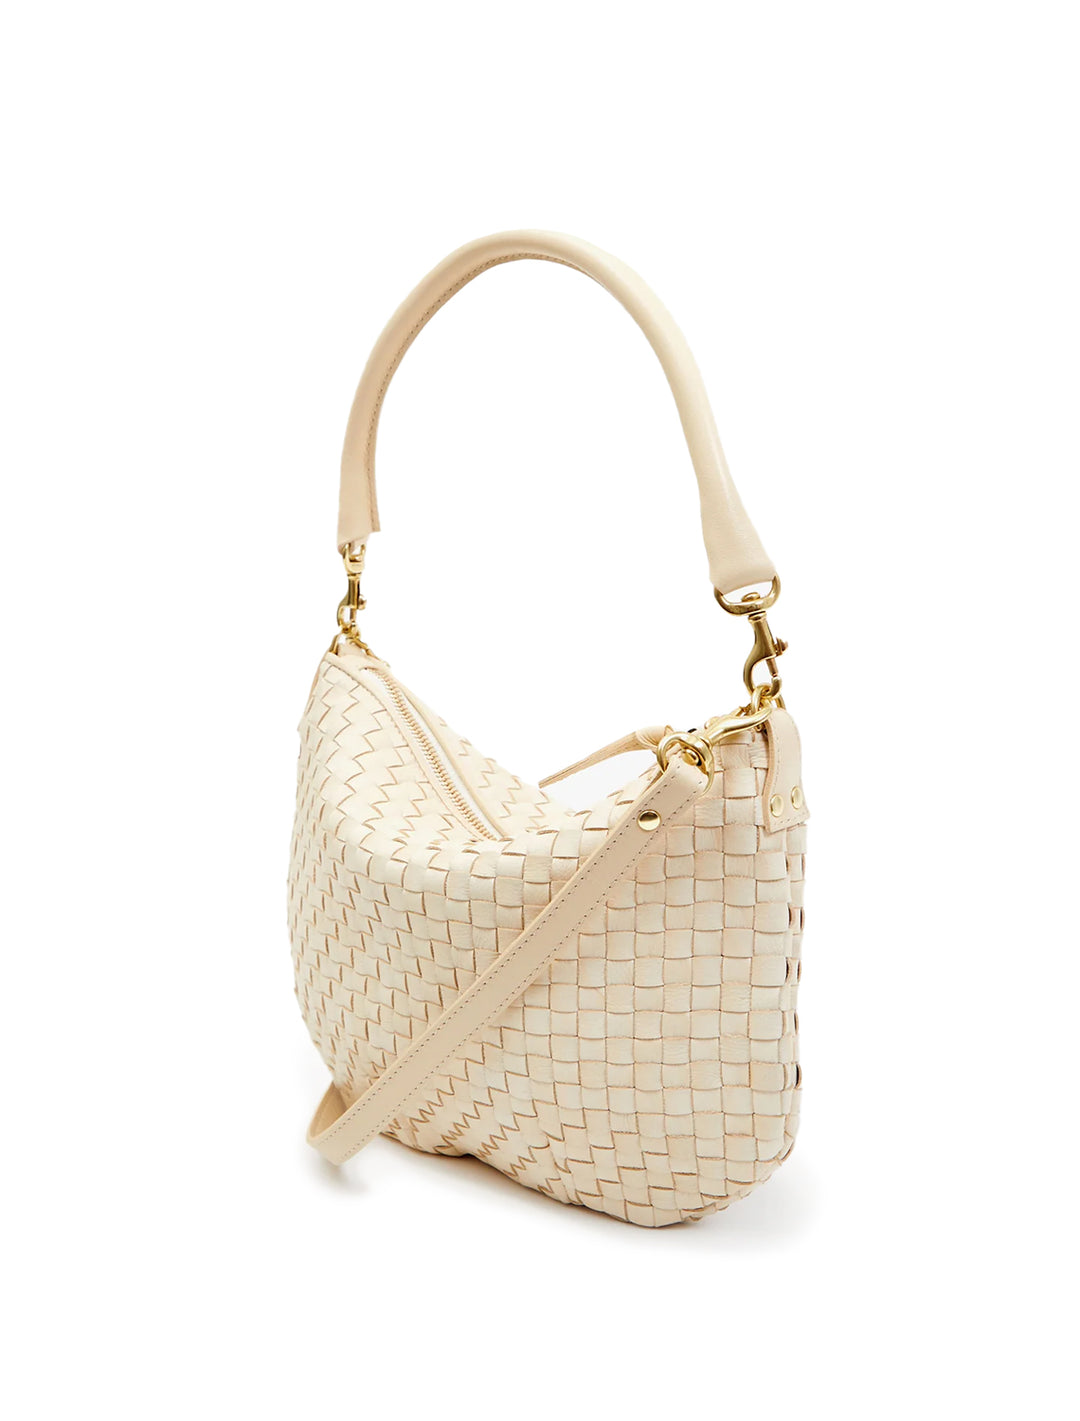 Side angle view of Clare V.'s petit moyen messenger in cream woven checker.